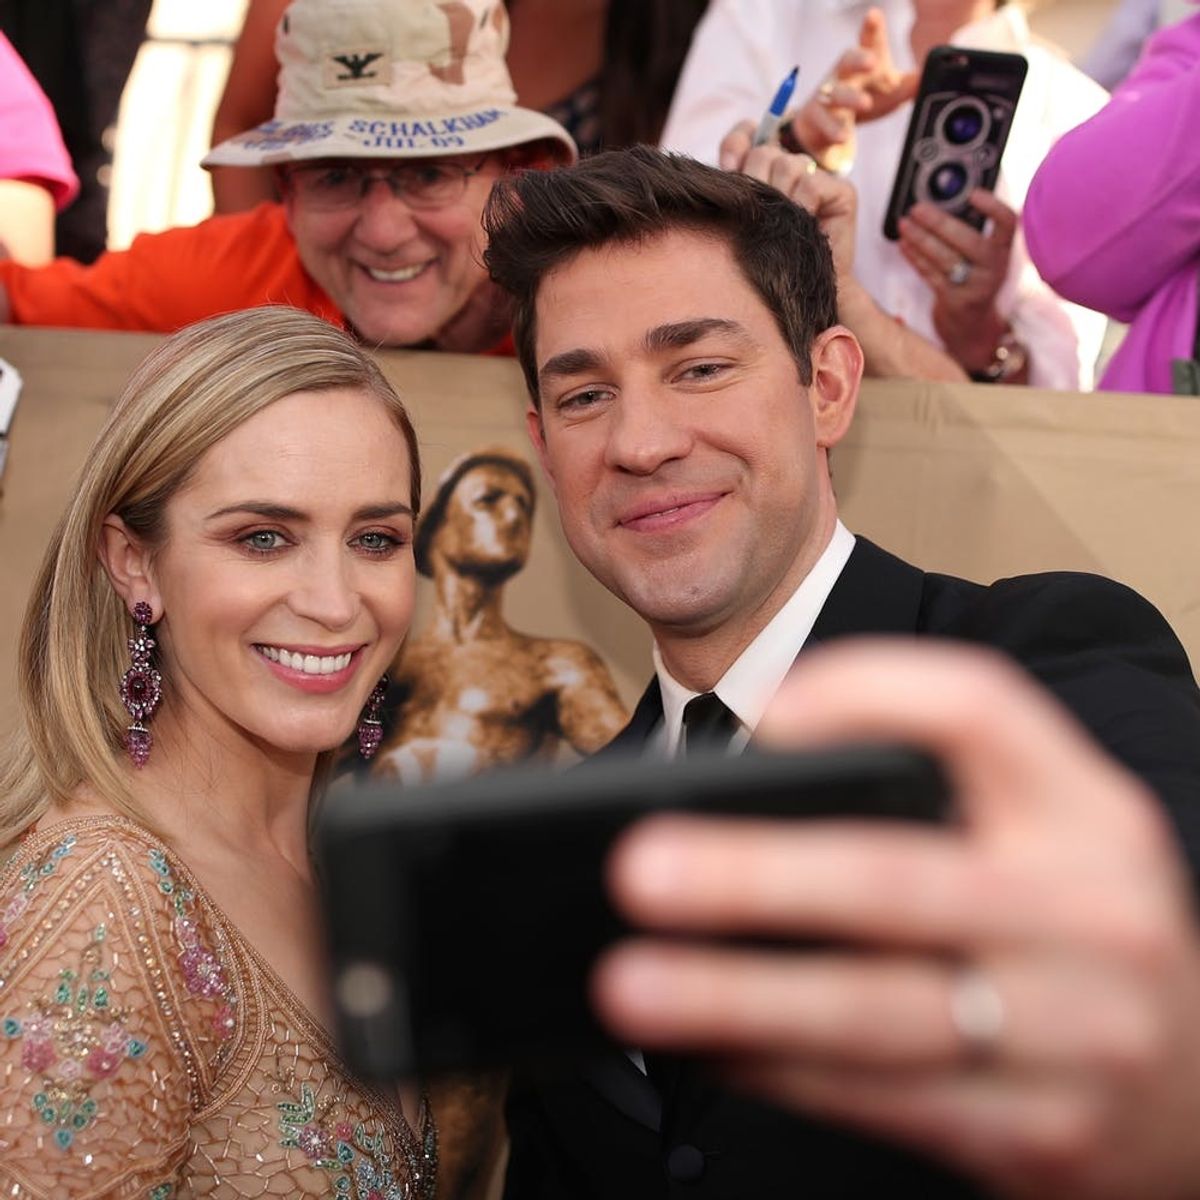 You Can Go on a Double Date With John Krasinski and Emily Blunt